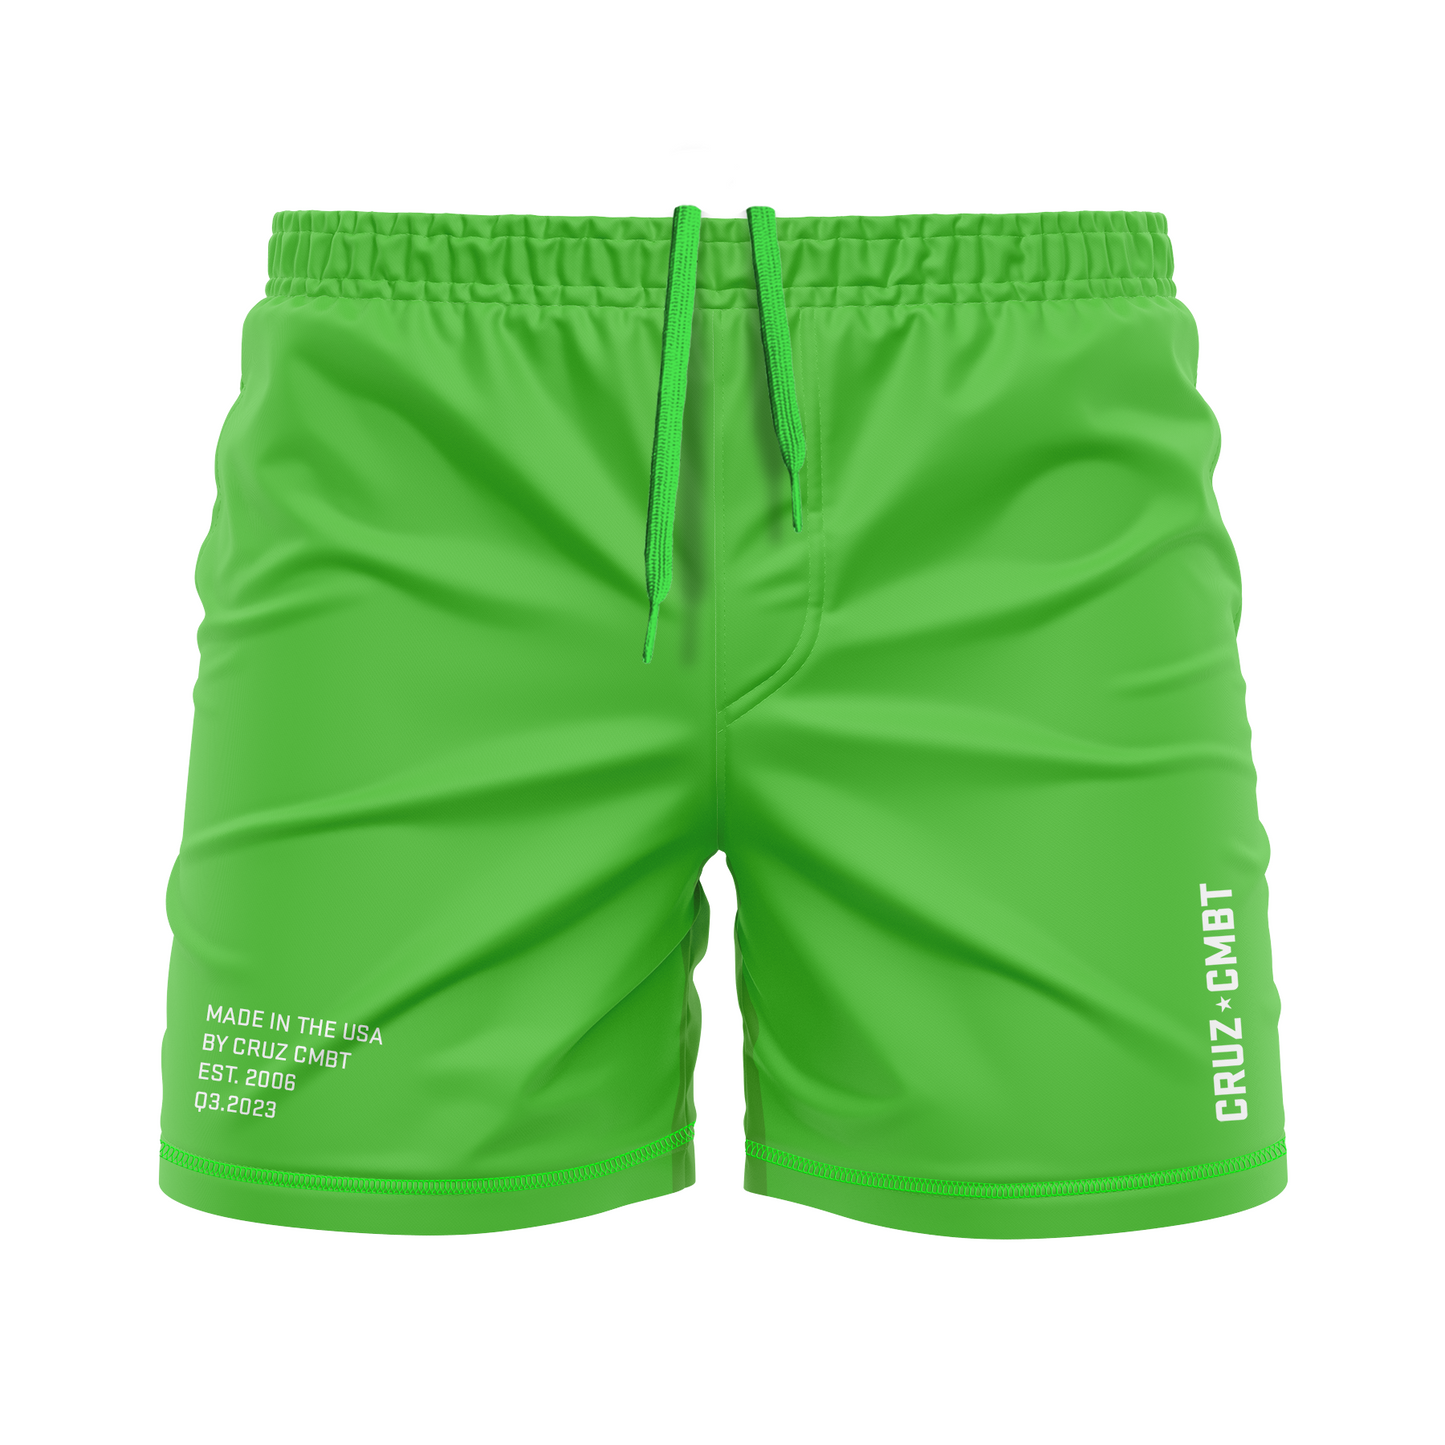 Base Collection men's FC shorts, green